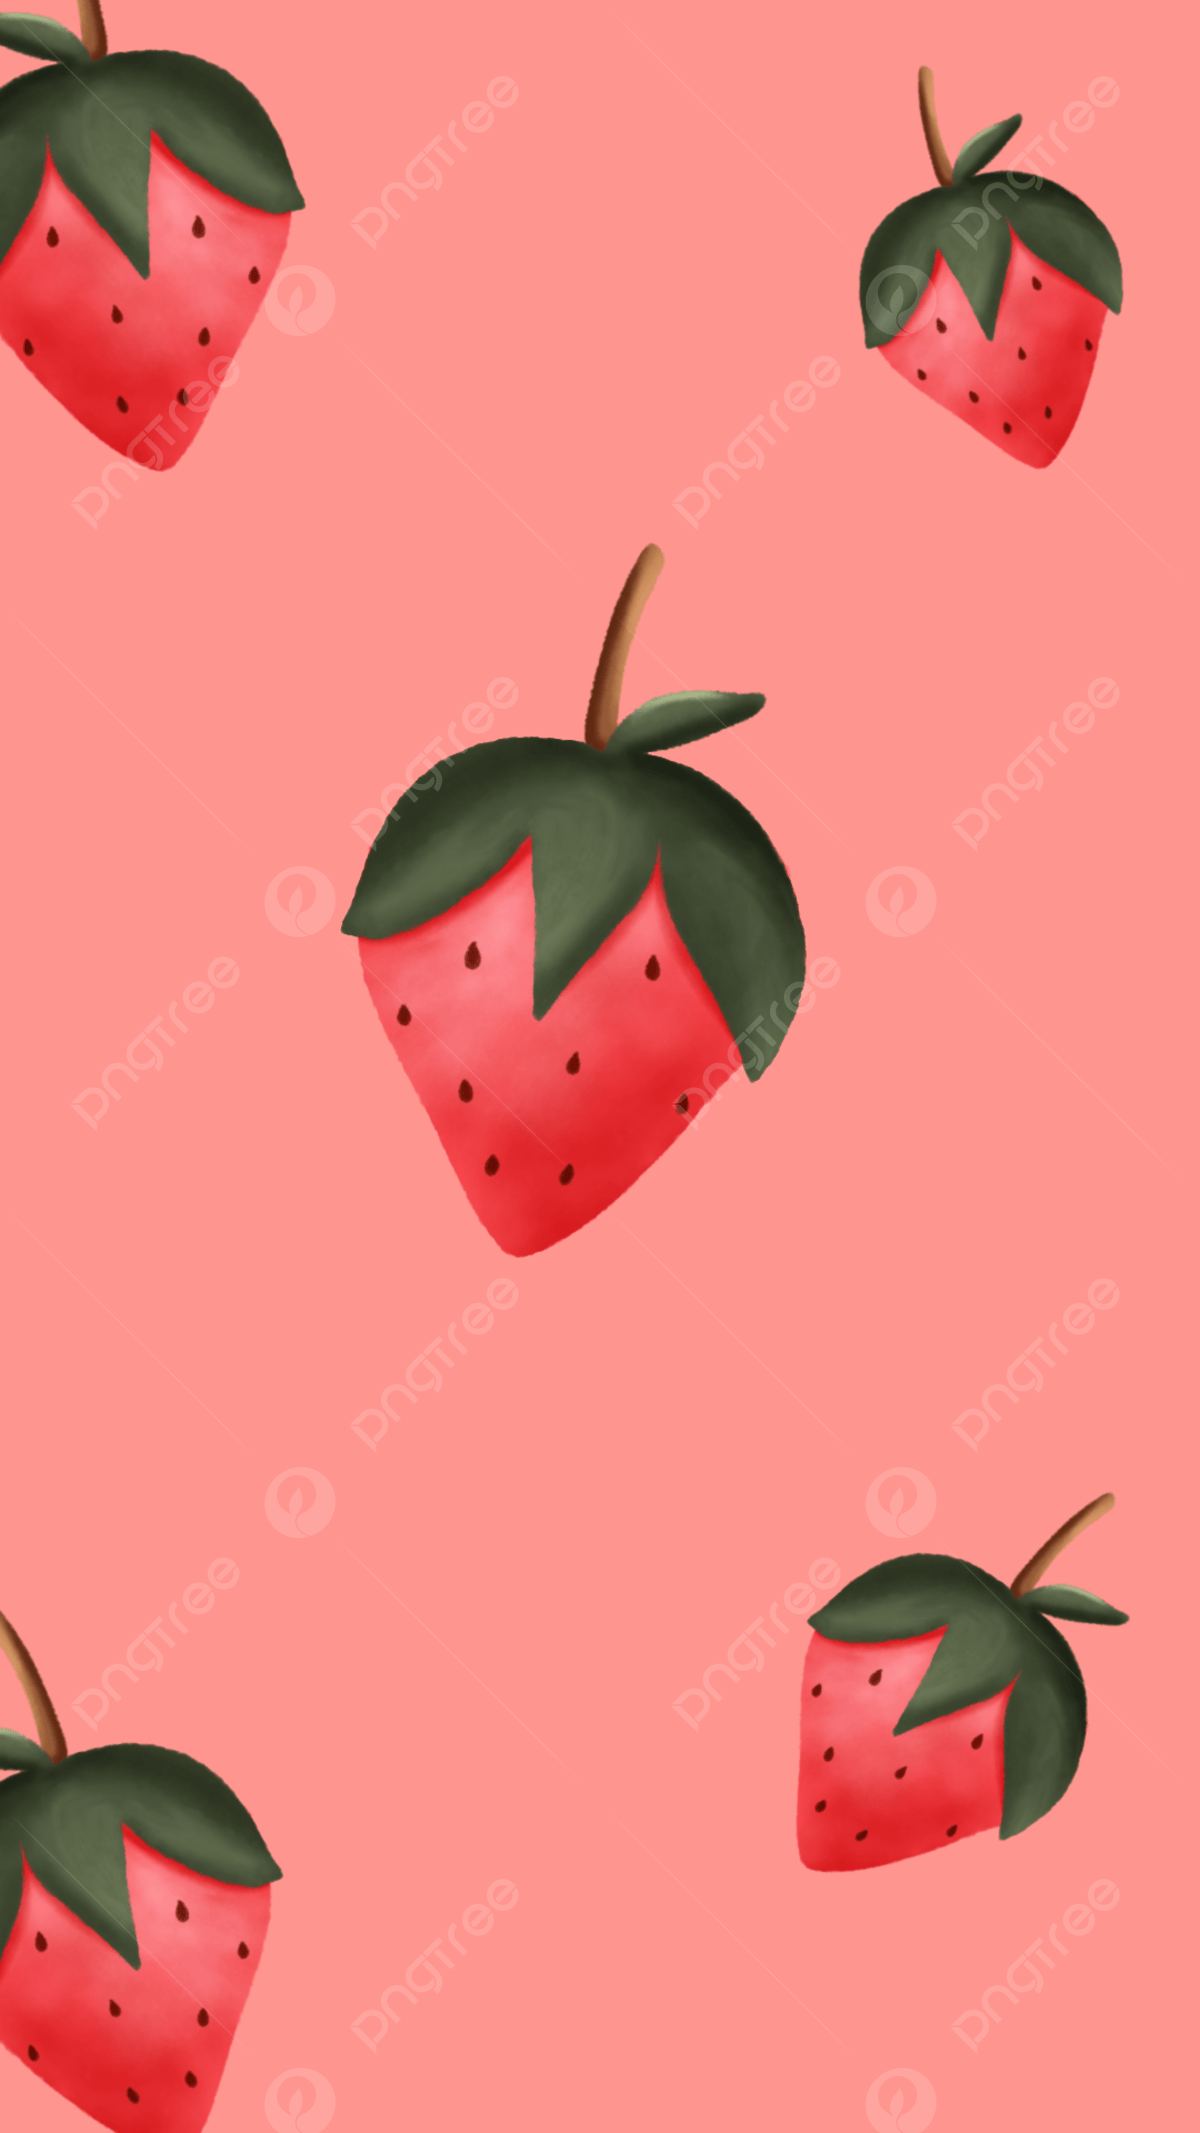 Cute And Unique Strawberry Wallpaper Background Wallpaper Image For Free Download